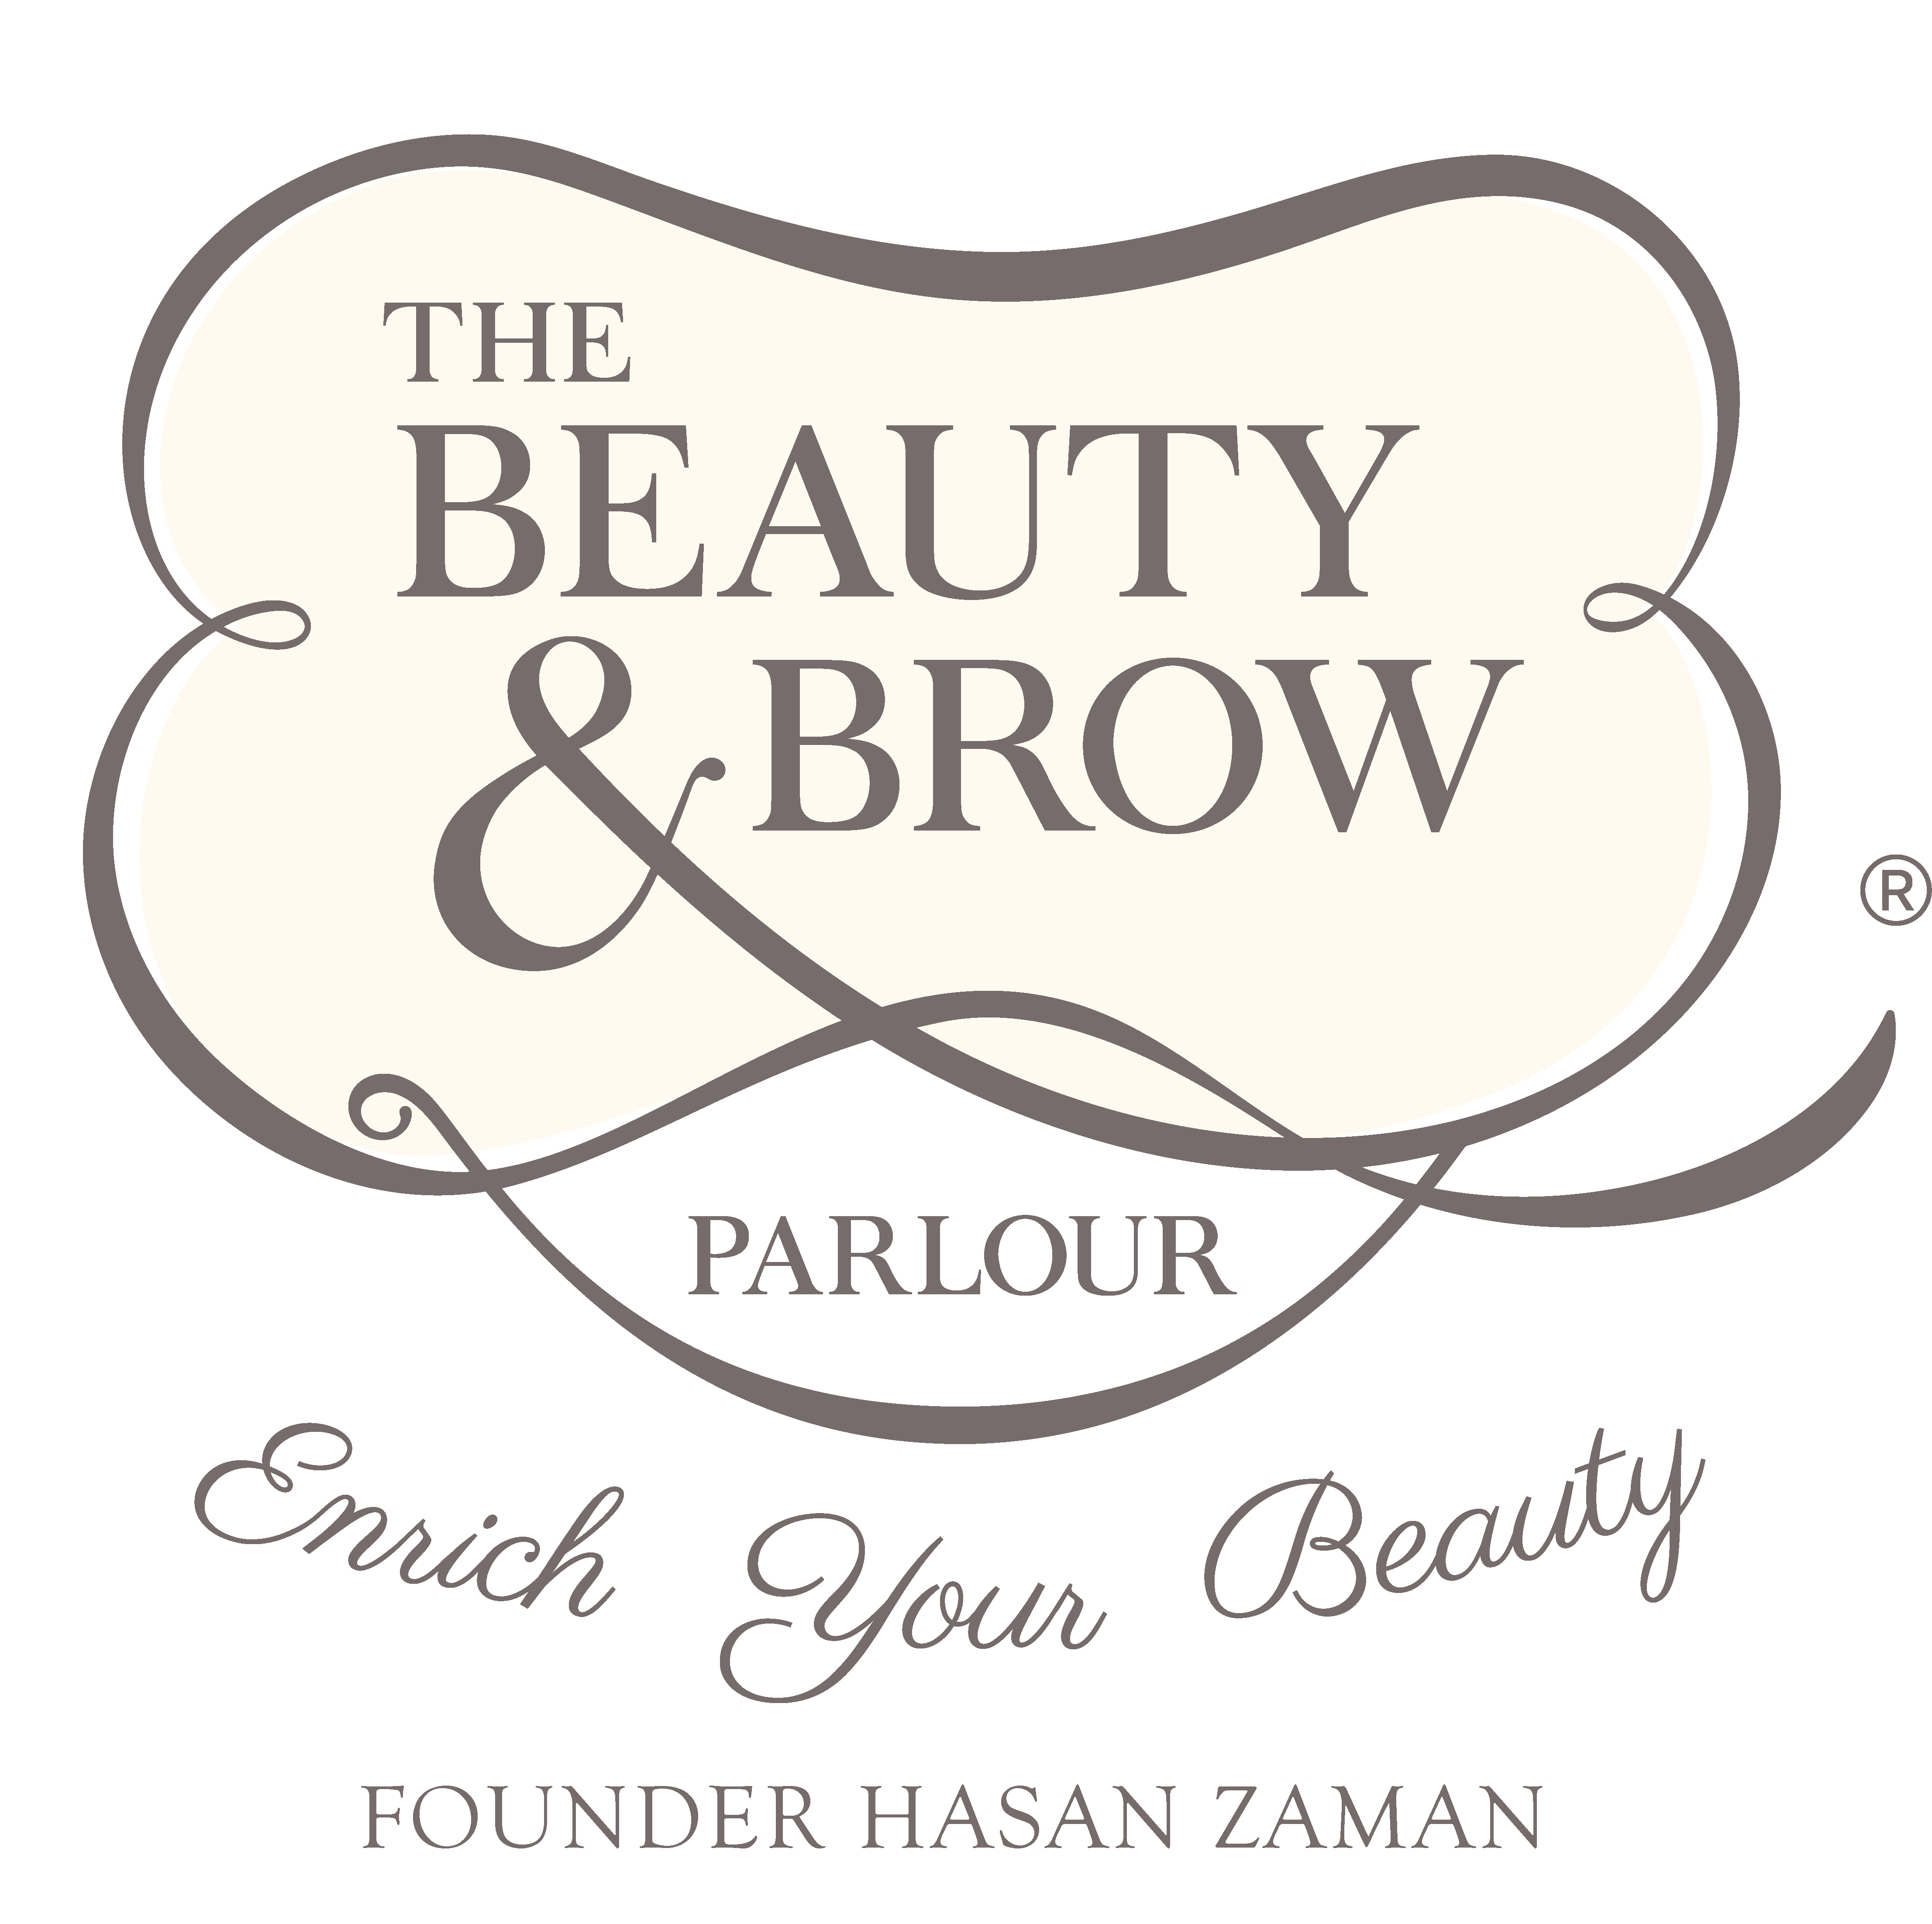 The Premier Beauty Parlour  The Beauty and Brow Parlour